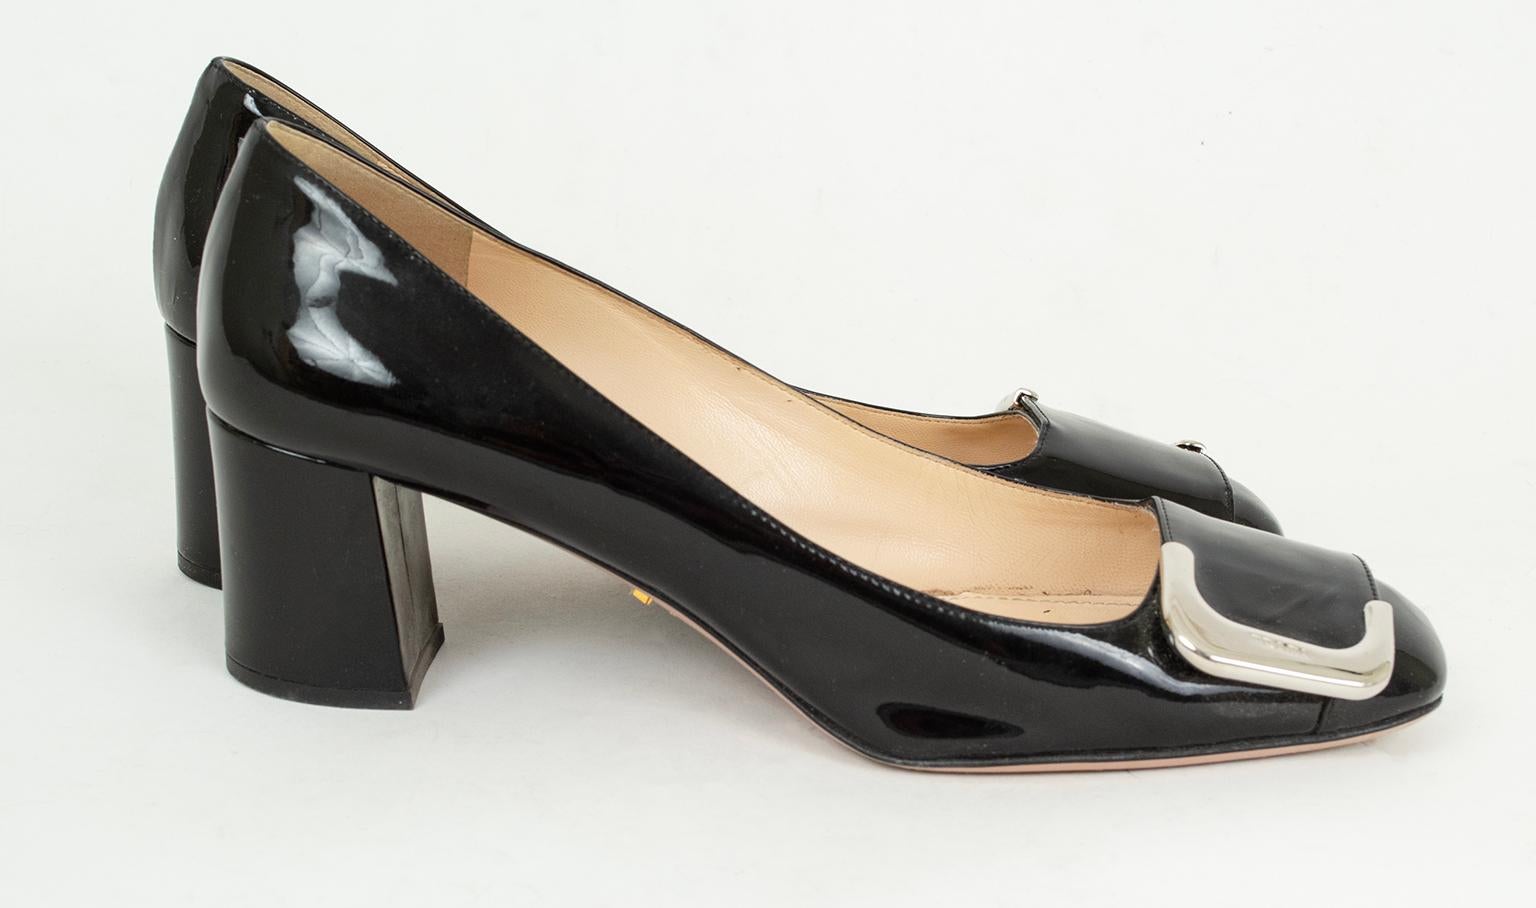 Prada Black Patent Block Heel Buckle Toe Loafer Pumps – 38.5, 2006 In Good Condition For Sale In Tucson, AZ